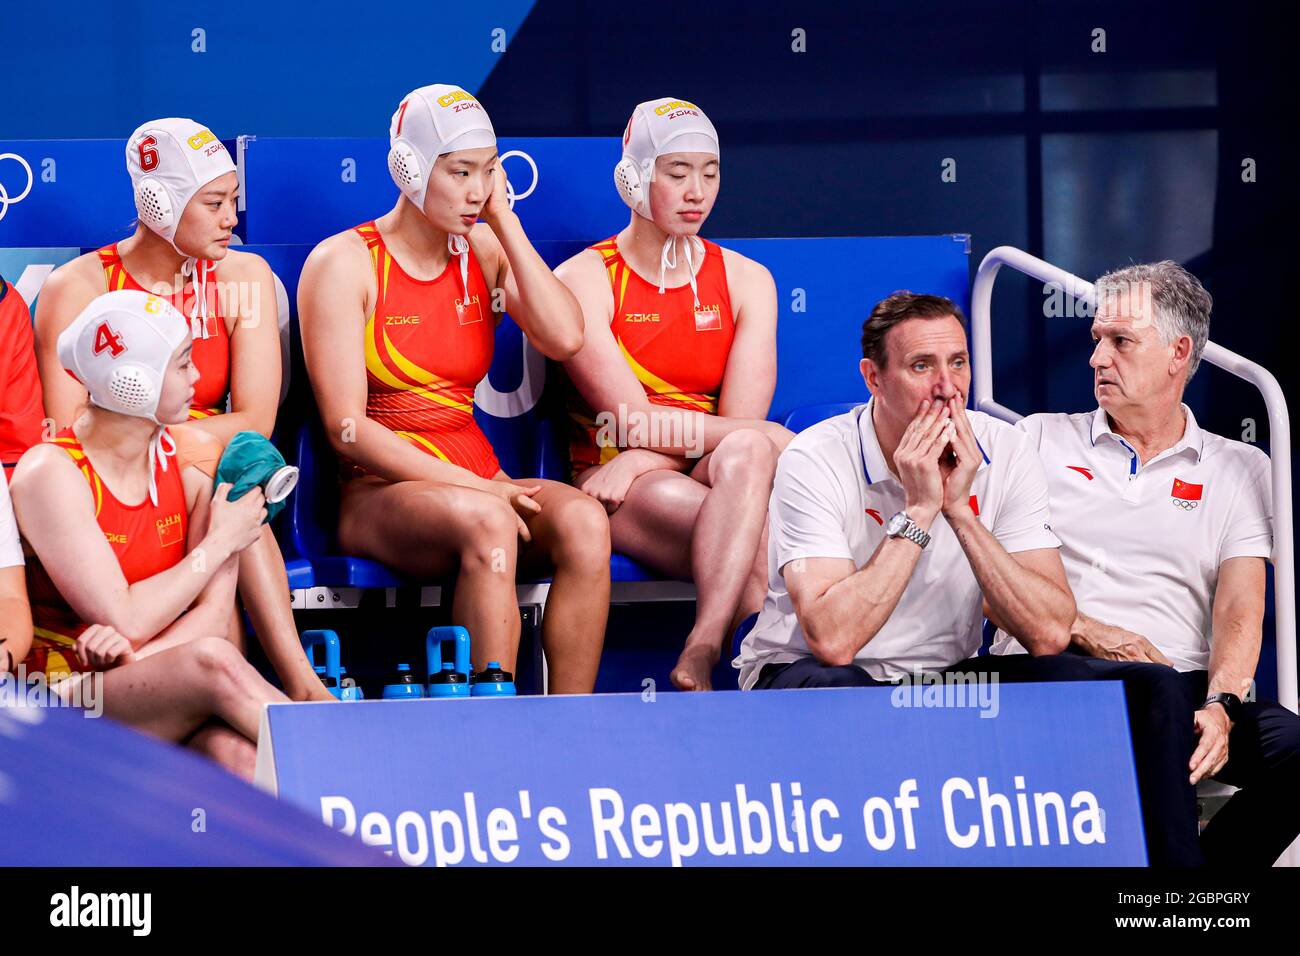 TOKYO, JAPAN - AUGUST 5: Dunhan Xiong of China, Ying Zhai of China, Yiwen Lu of China, Danyi Zhang of China, Salvador Gomez of China, Head Coach Petar Porobic of China during the Tokyo 2020 Olympic Waterpolo Tournament Women Classification 5th-8th match between Team China and Team Netherlands at Tatsumi Waterpolo Centre on August 5, 2021 in Tokyo, Japan (Photo by Marcel ter Bals/Orange Pictures) NOCNSF Stock Photo